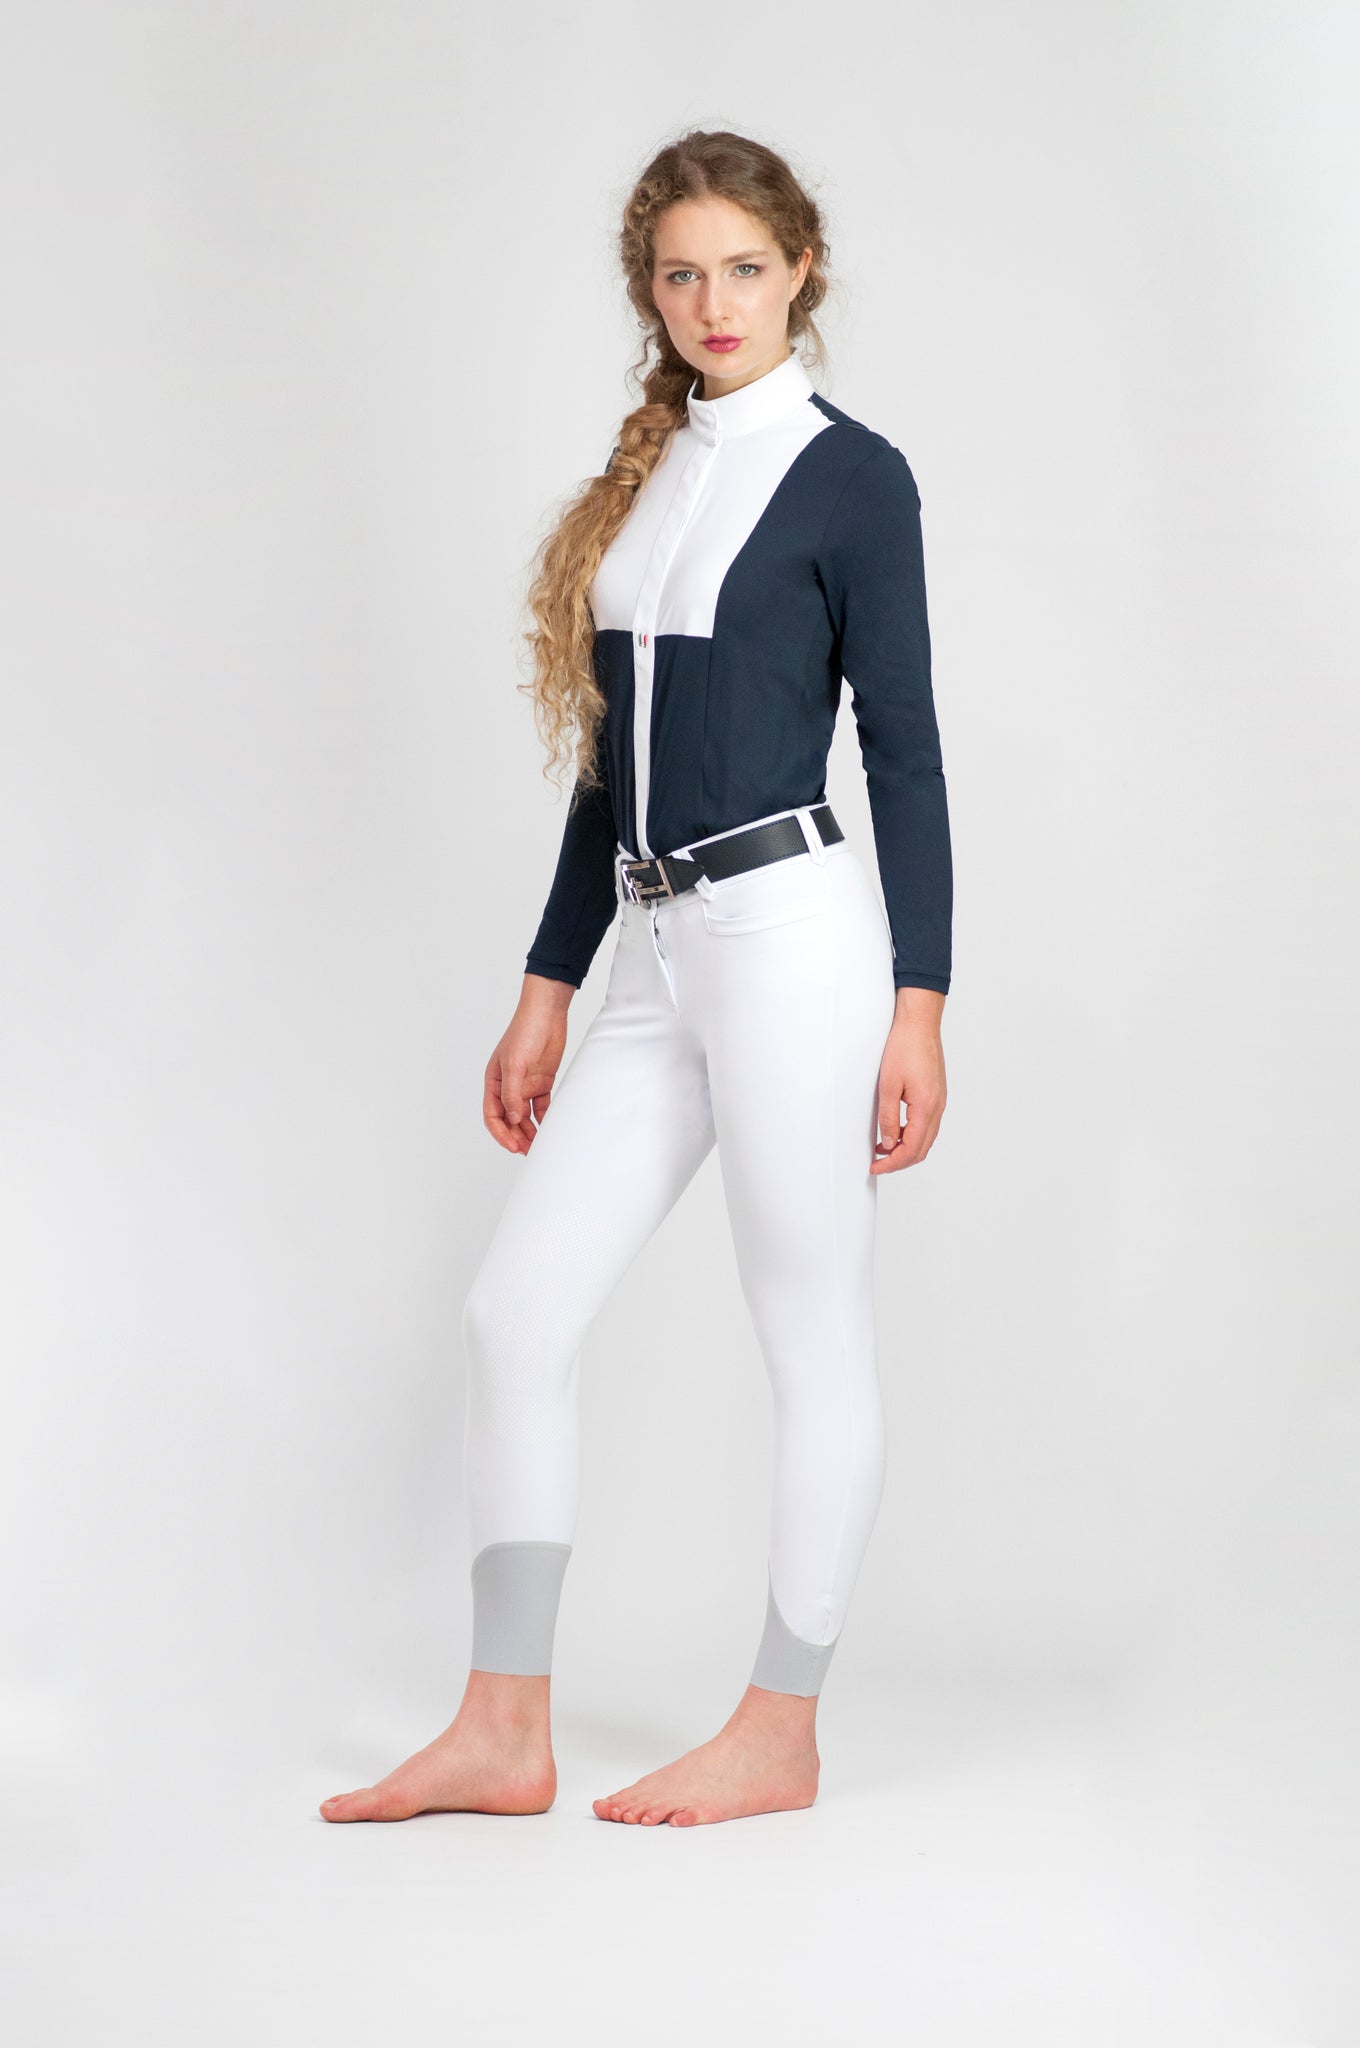 equestrian competition breeches pants